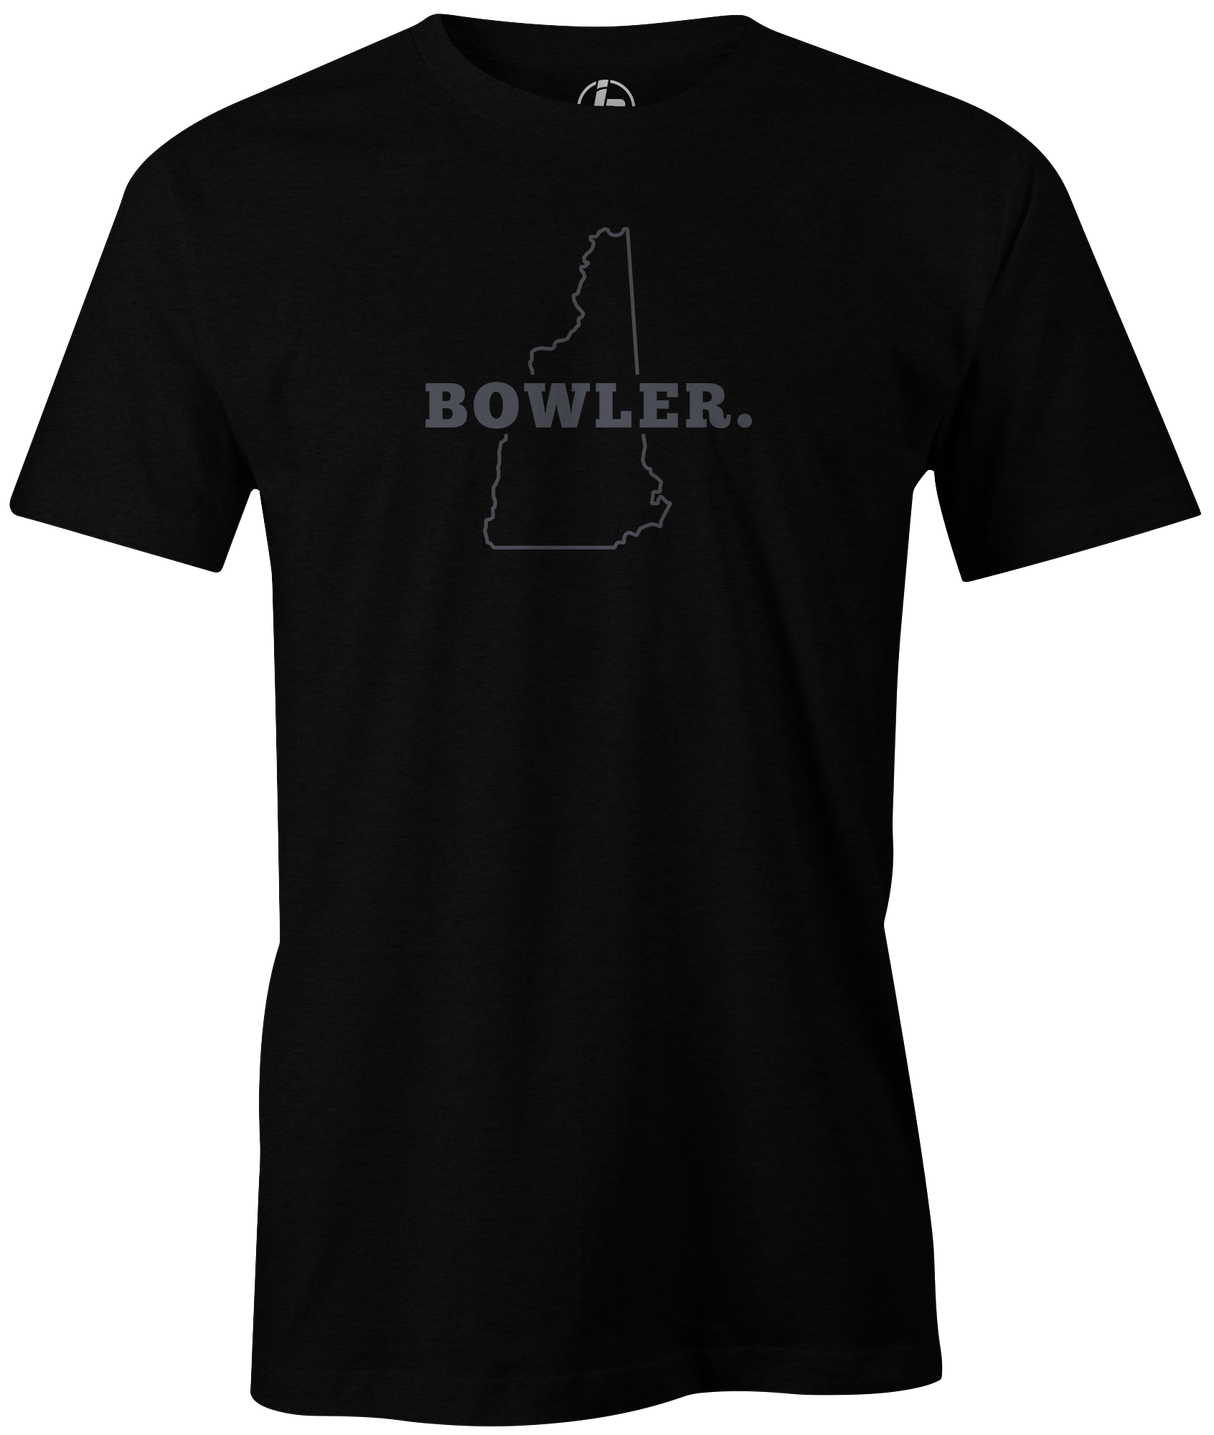 New Hampshire State Men's Bowling T-shirt, Black, Cool, novelty, tshirt, tee, tee-shirt, tee shirt, teeshirt, team, comfortable